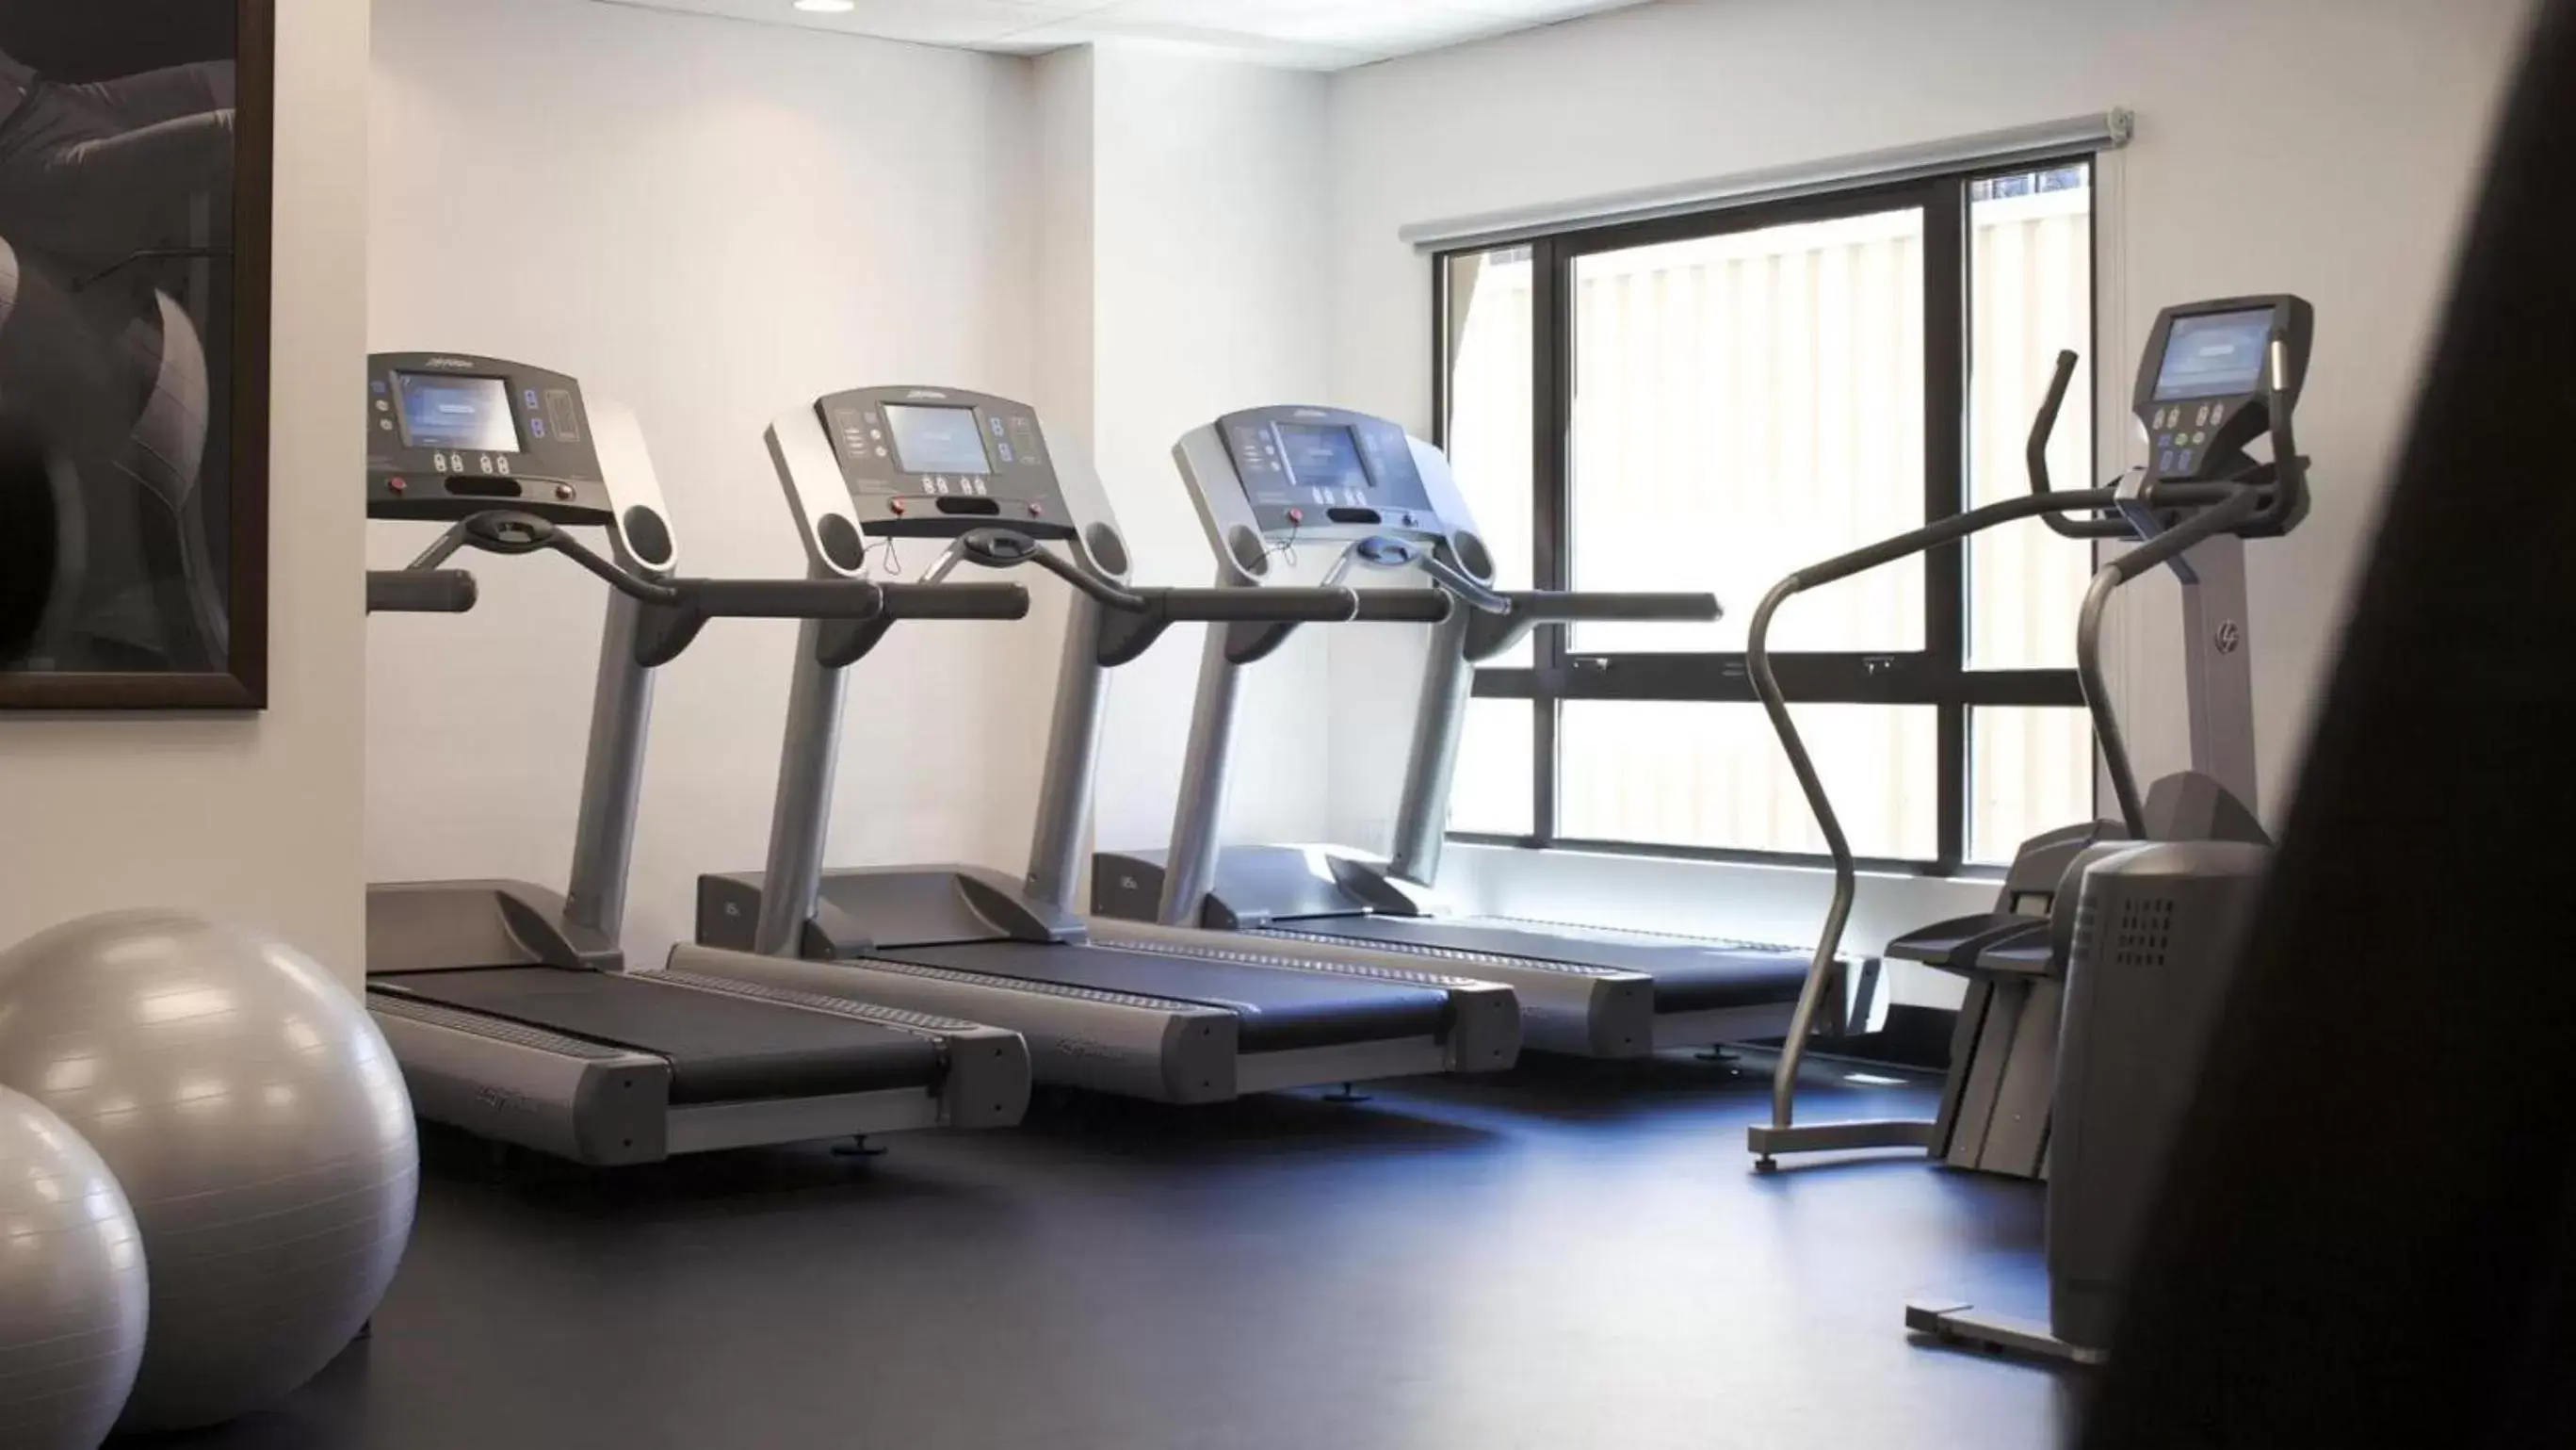 Fitness centre/facilities, Fitness Center/Facilities in Dossier